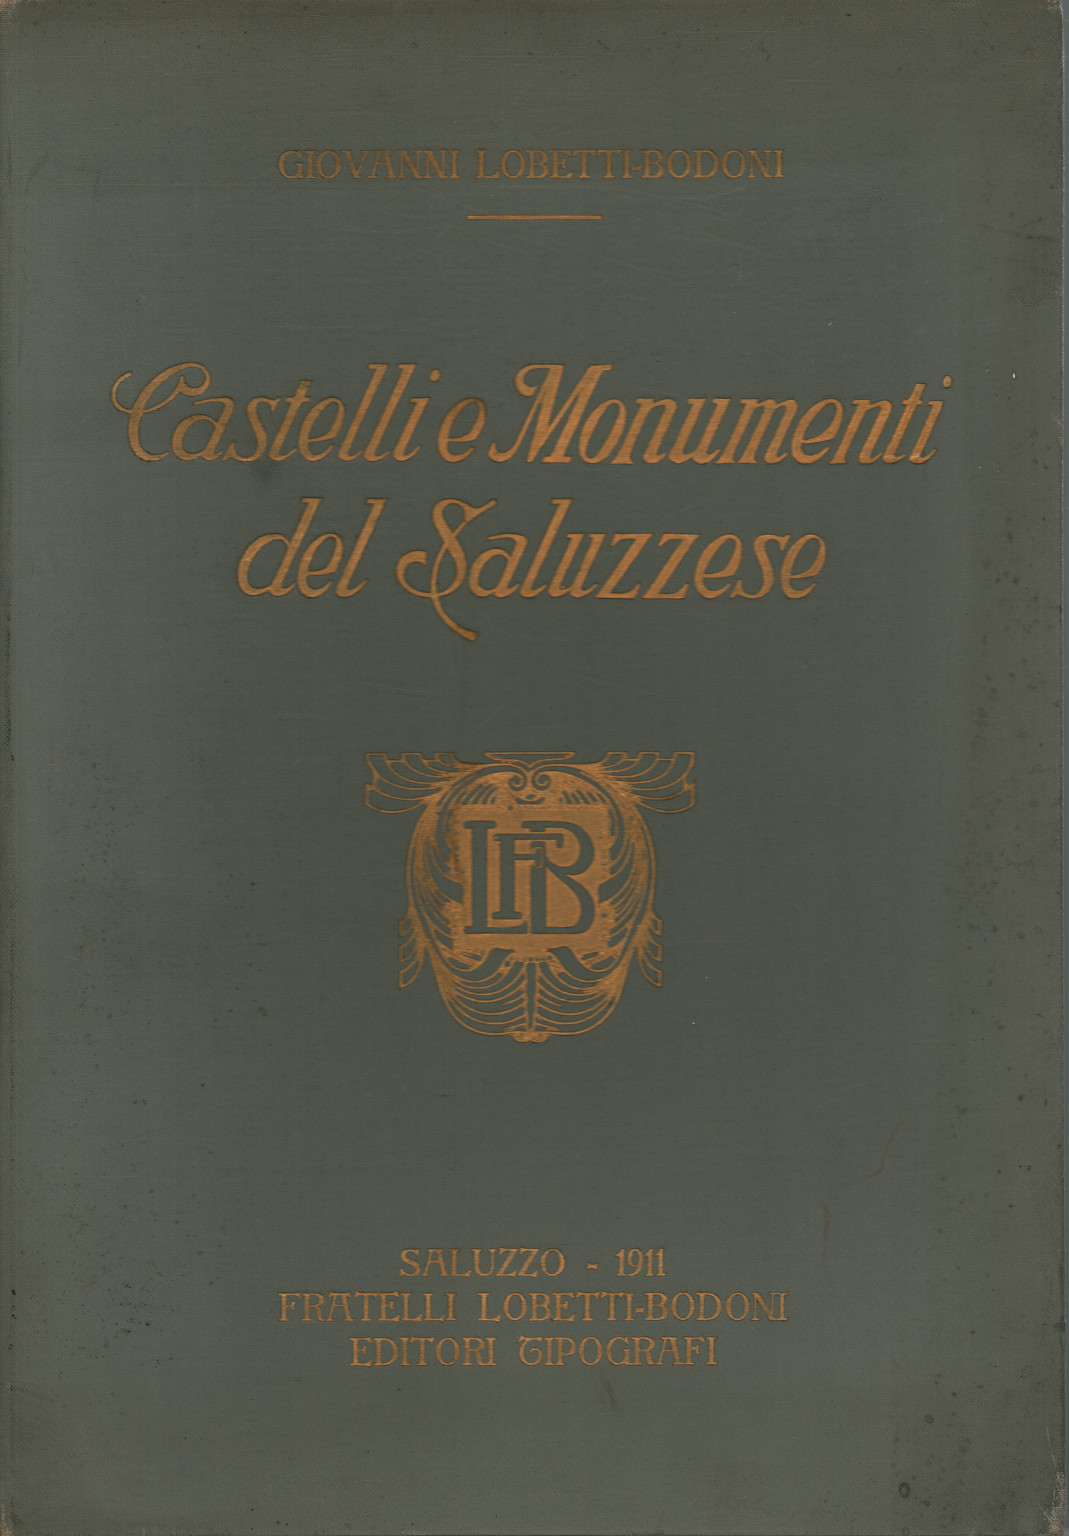 Castles and Monuments of Saluzzo, s.a.